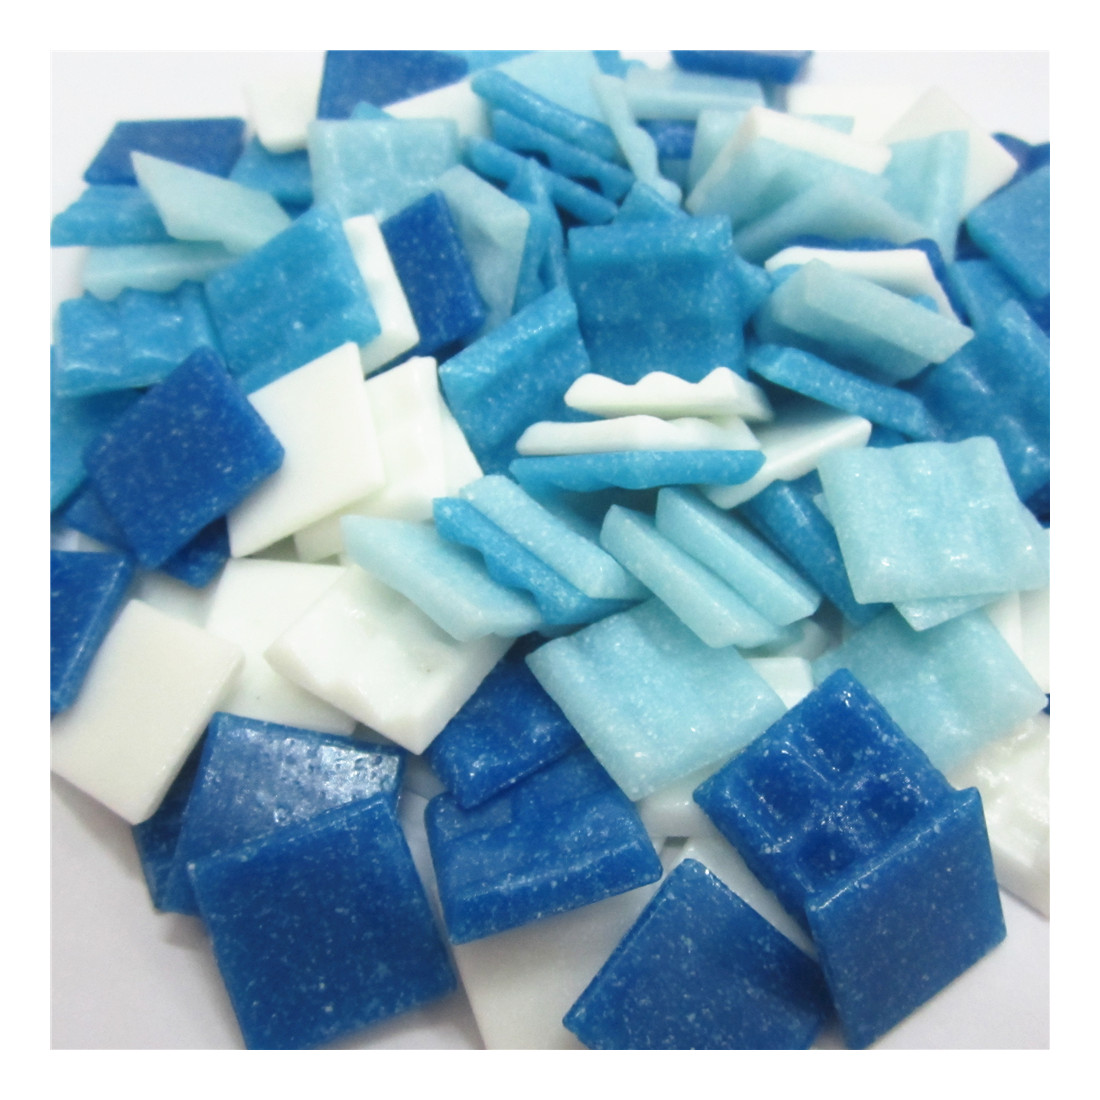 Decorative Mosaic Tiles Assorted Colors Mosaic Pieces Glass Mosaic Supplies for Crafts